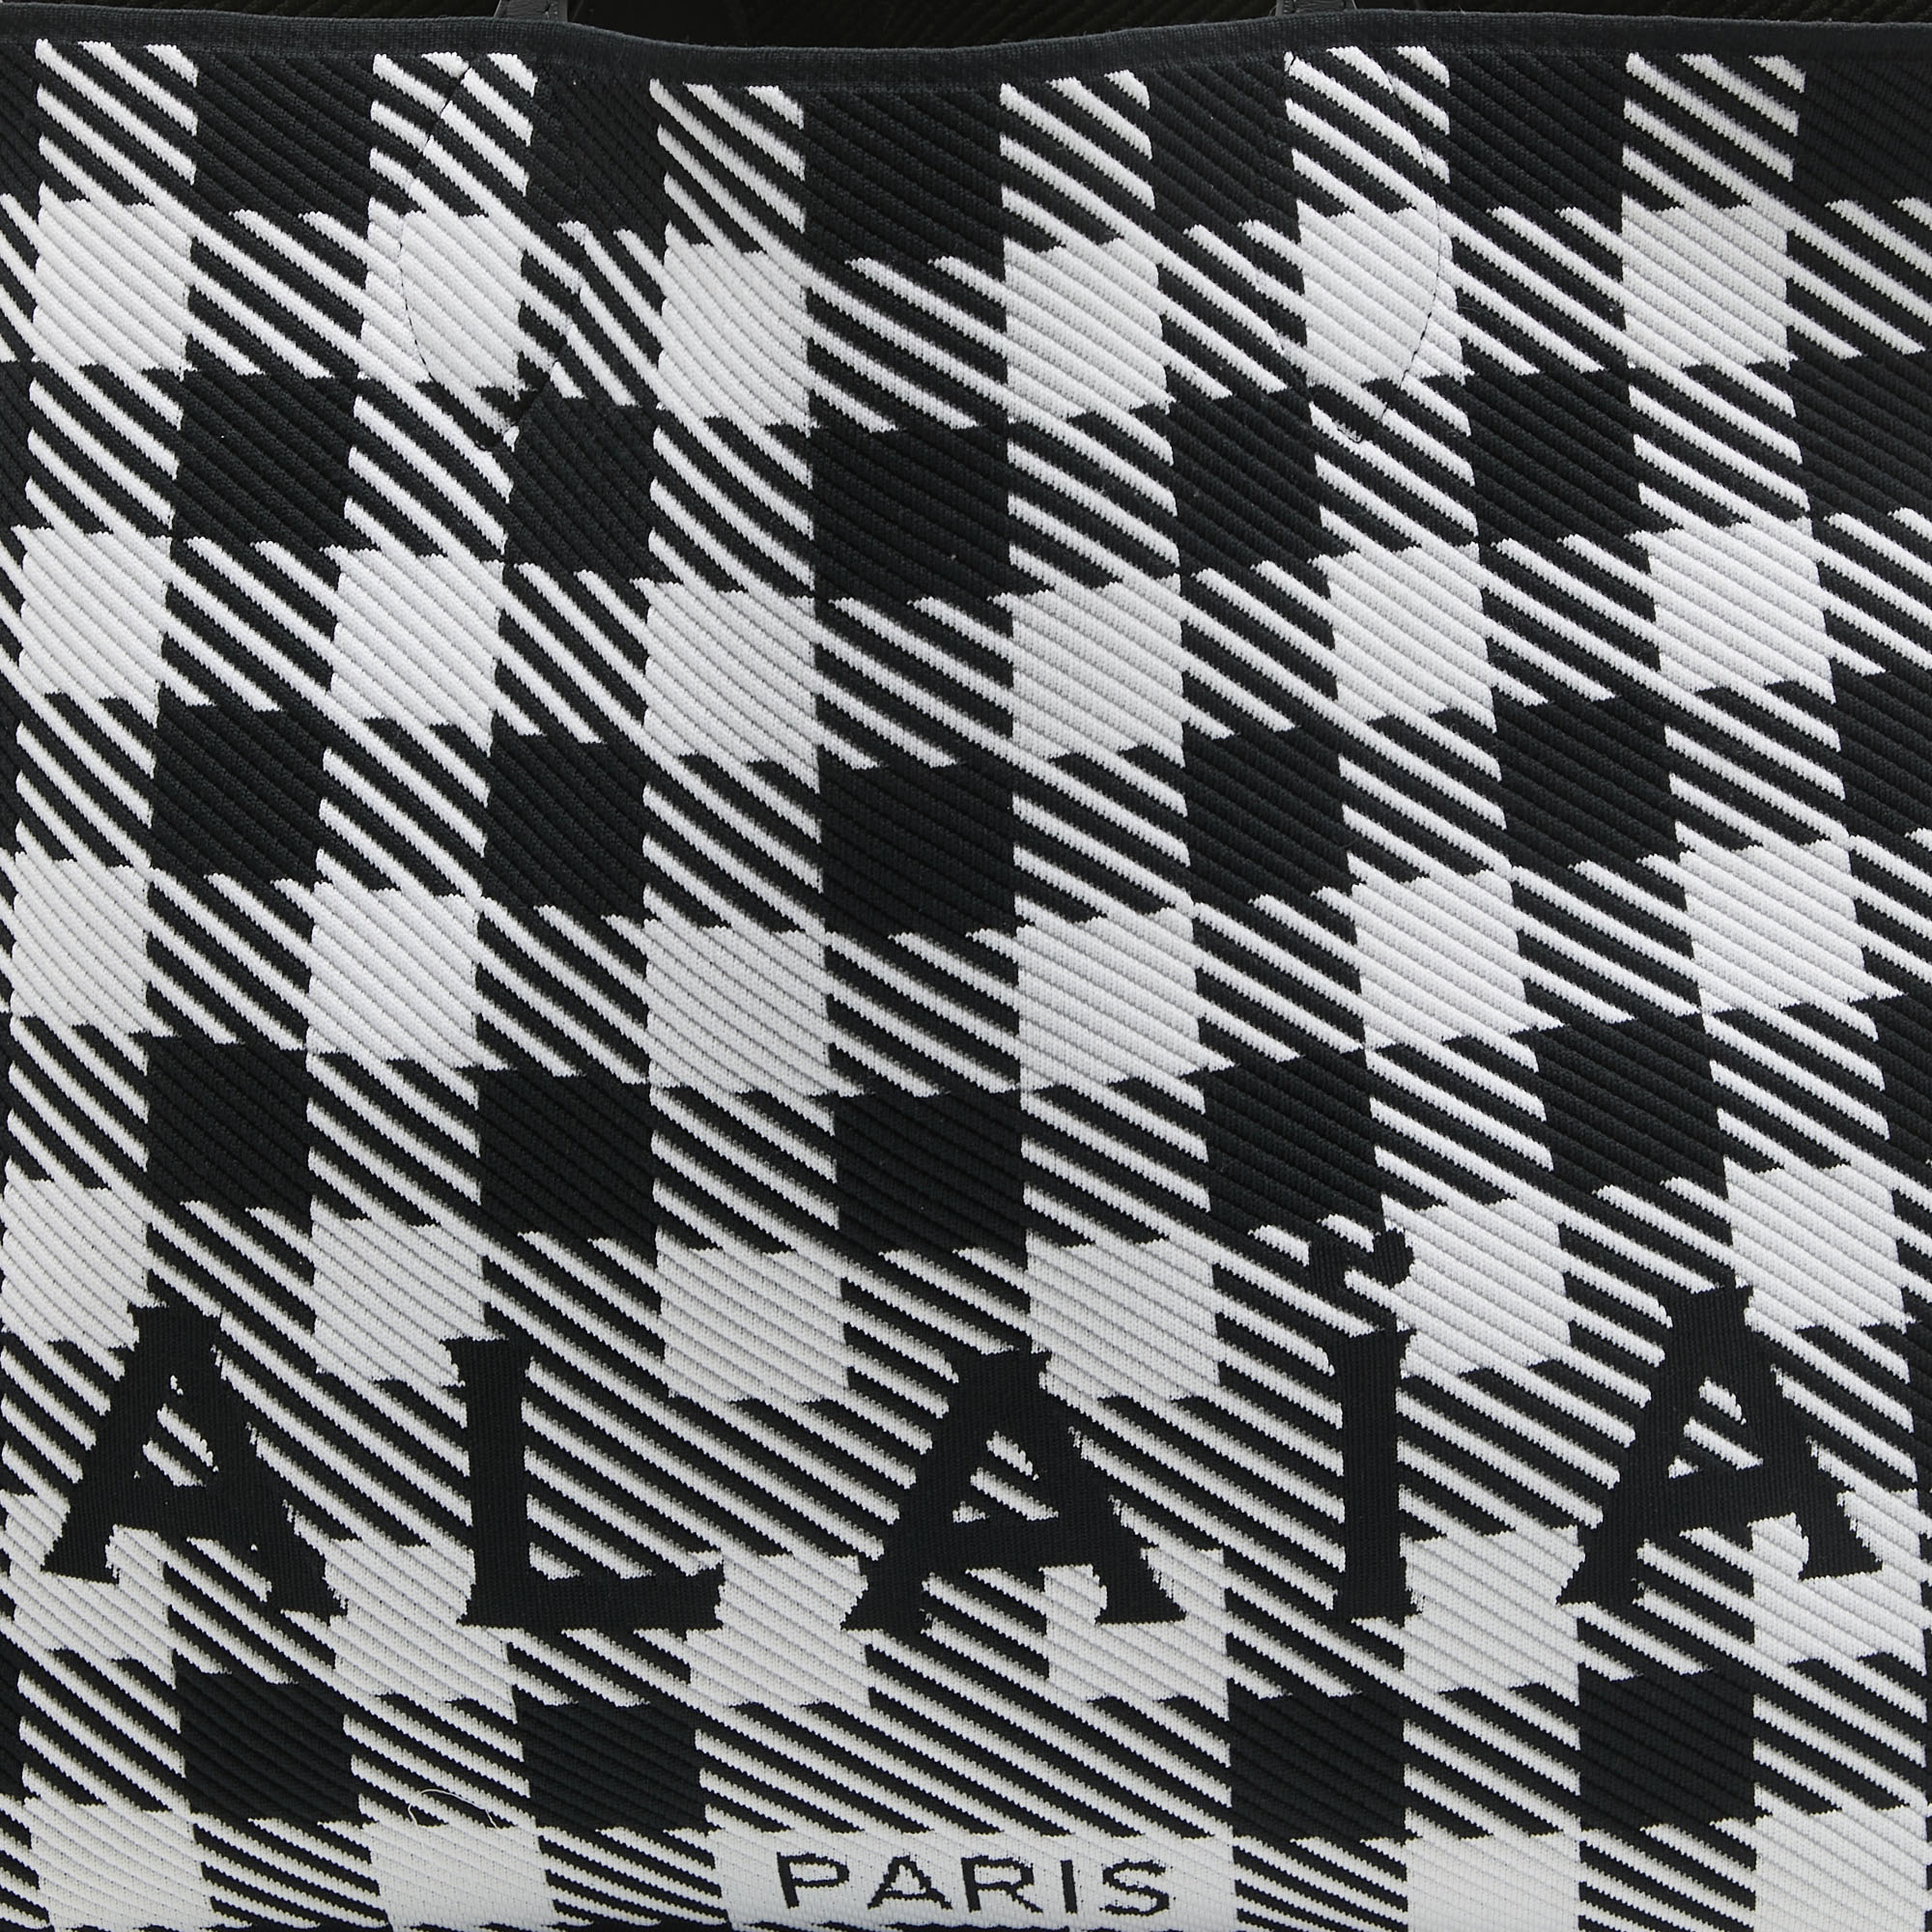 Alaia Black/White Knitted Jacquard Fabric And Leather Large Houndstooth Tote